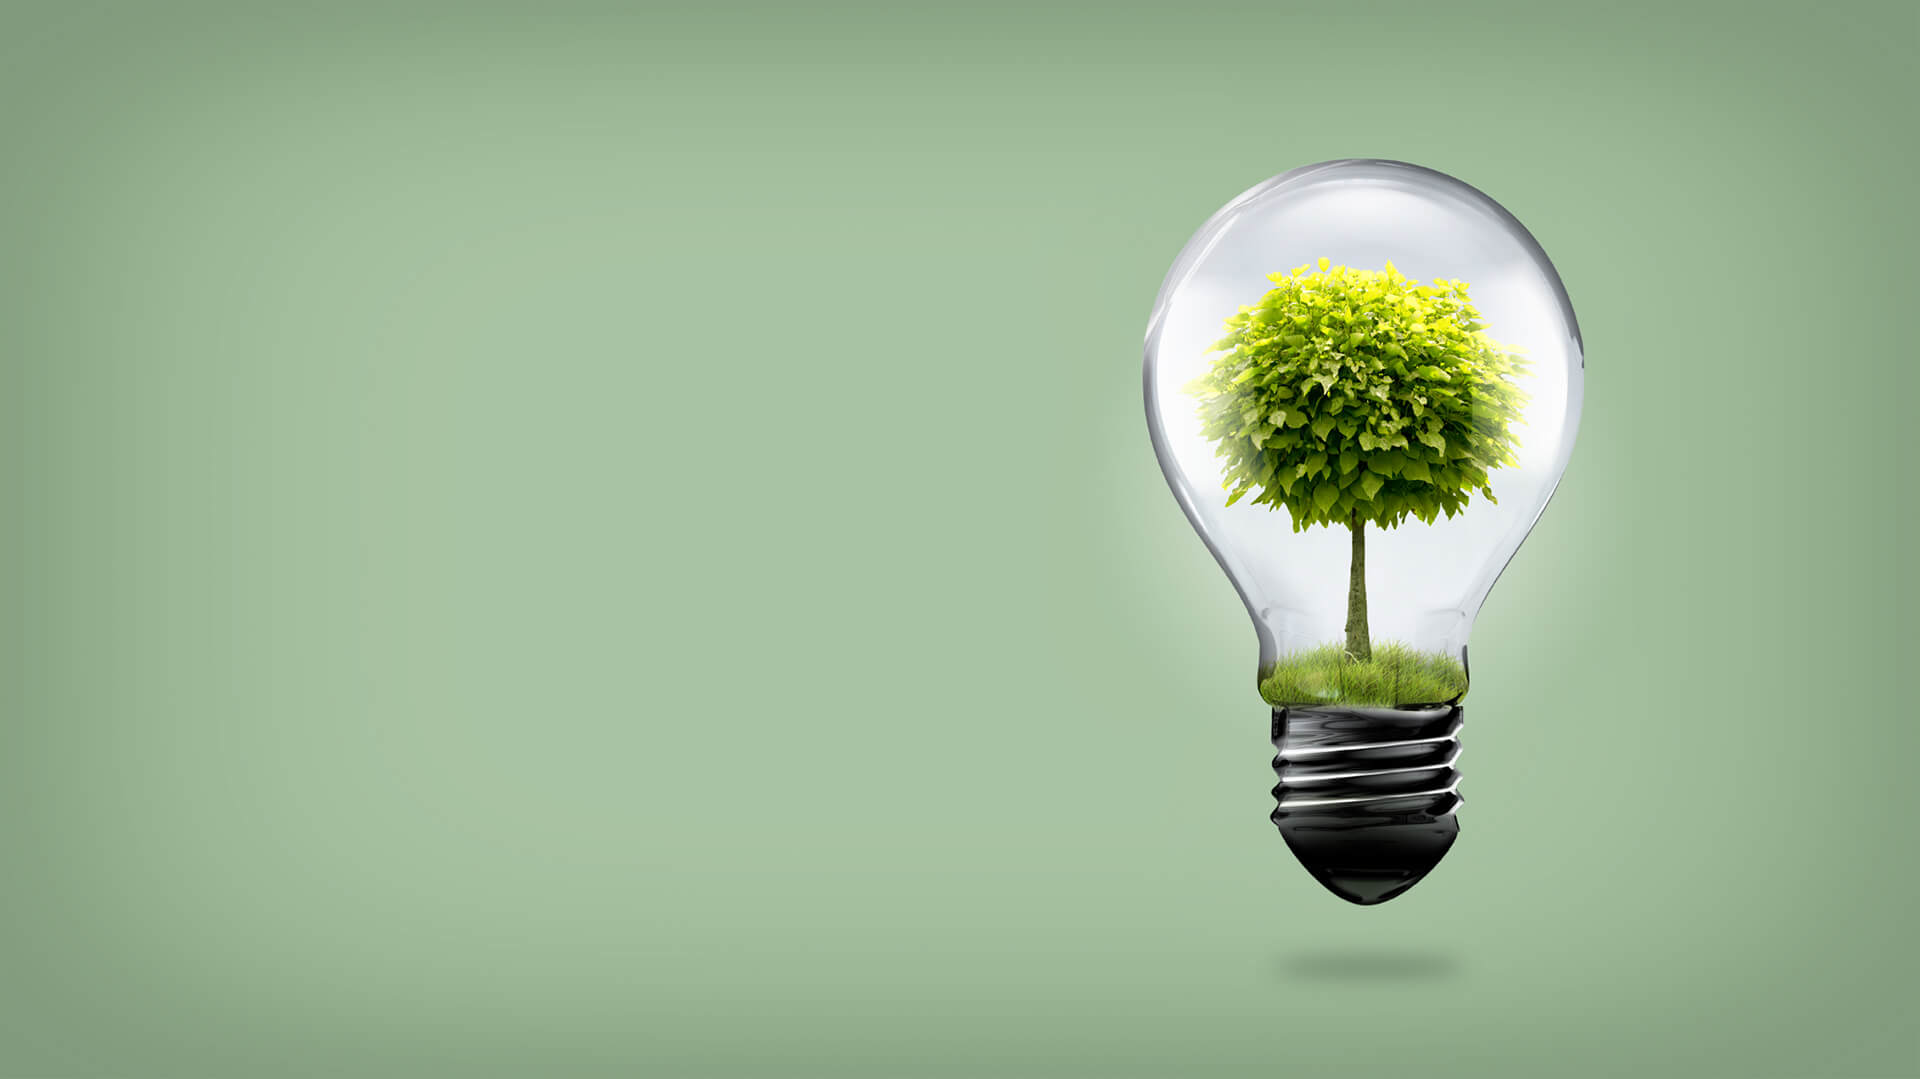 LED bulb with a green tree inside, symbolizing the environmental and budget-friendly benefits of property management LED lighting.